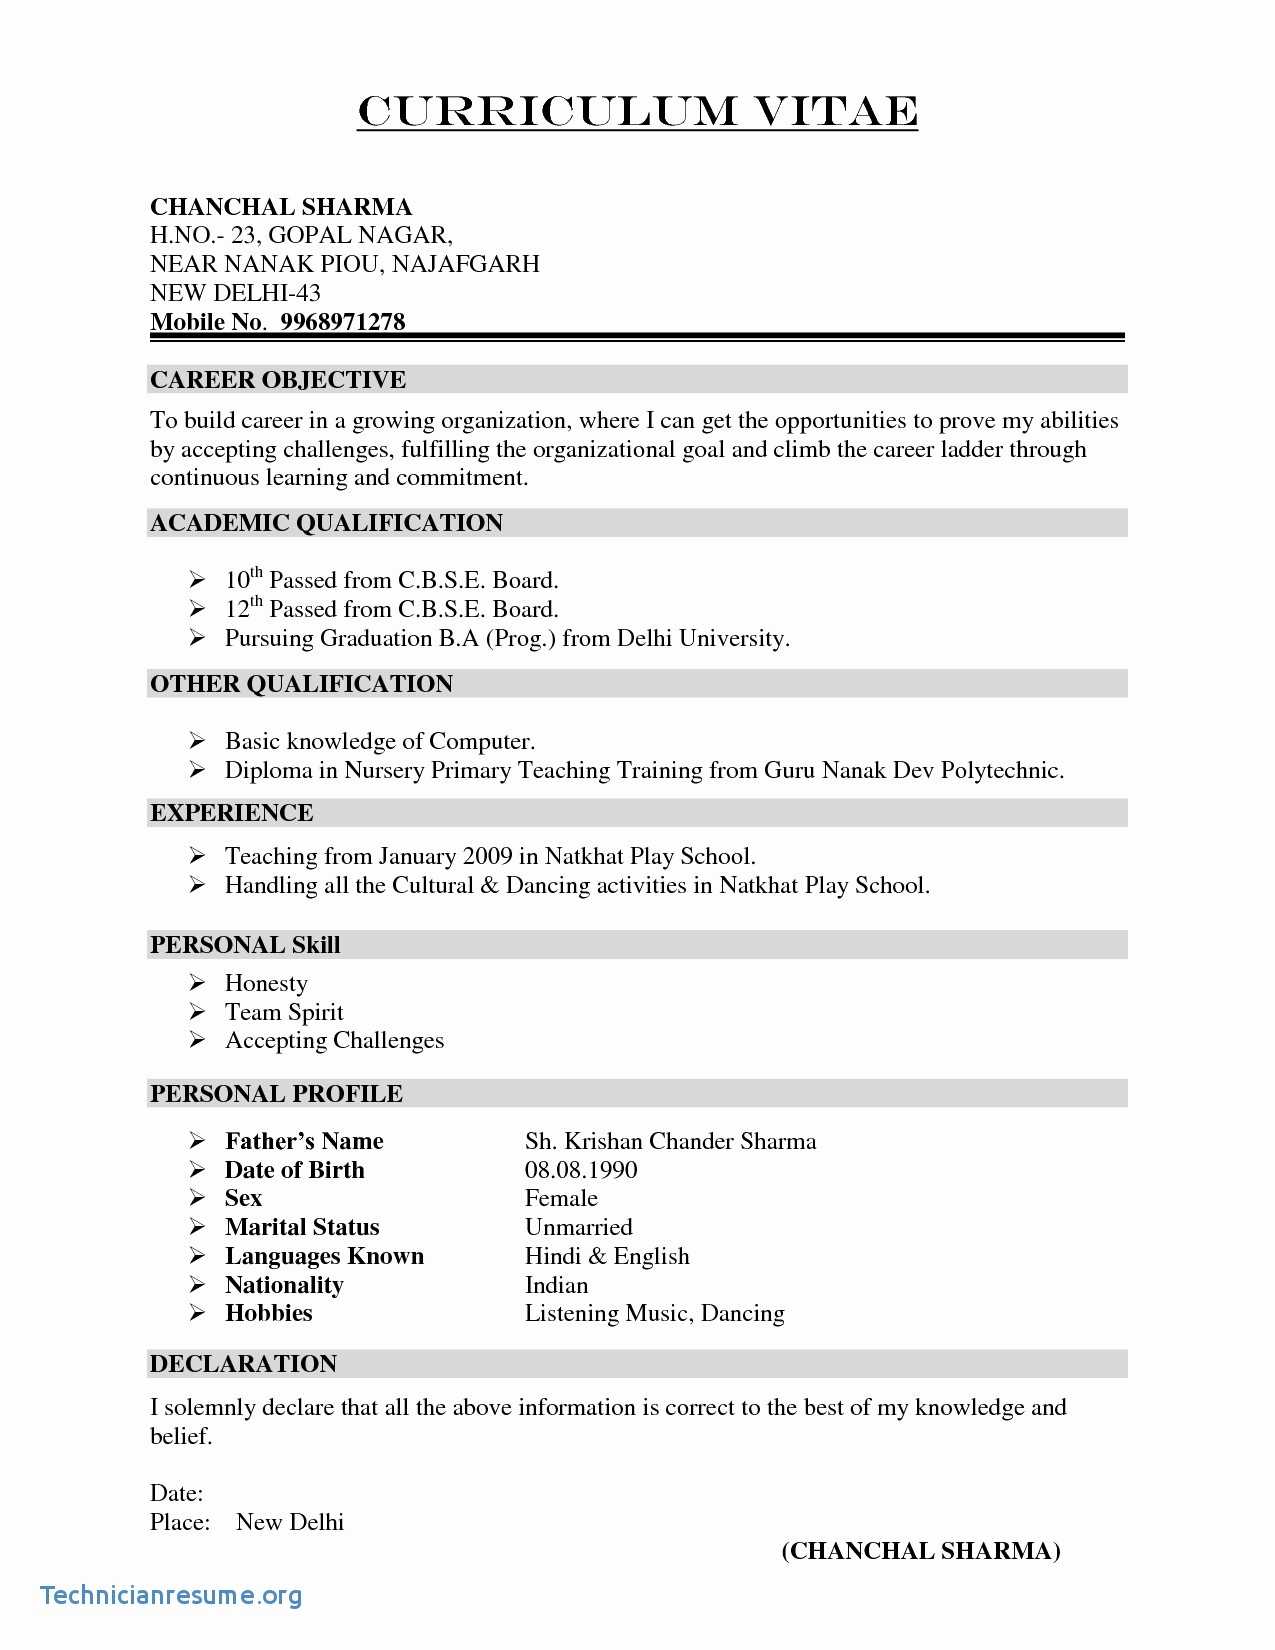 Geometry Reflection Worksheet and High School Student Resume with No Work Experience Resume Template